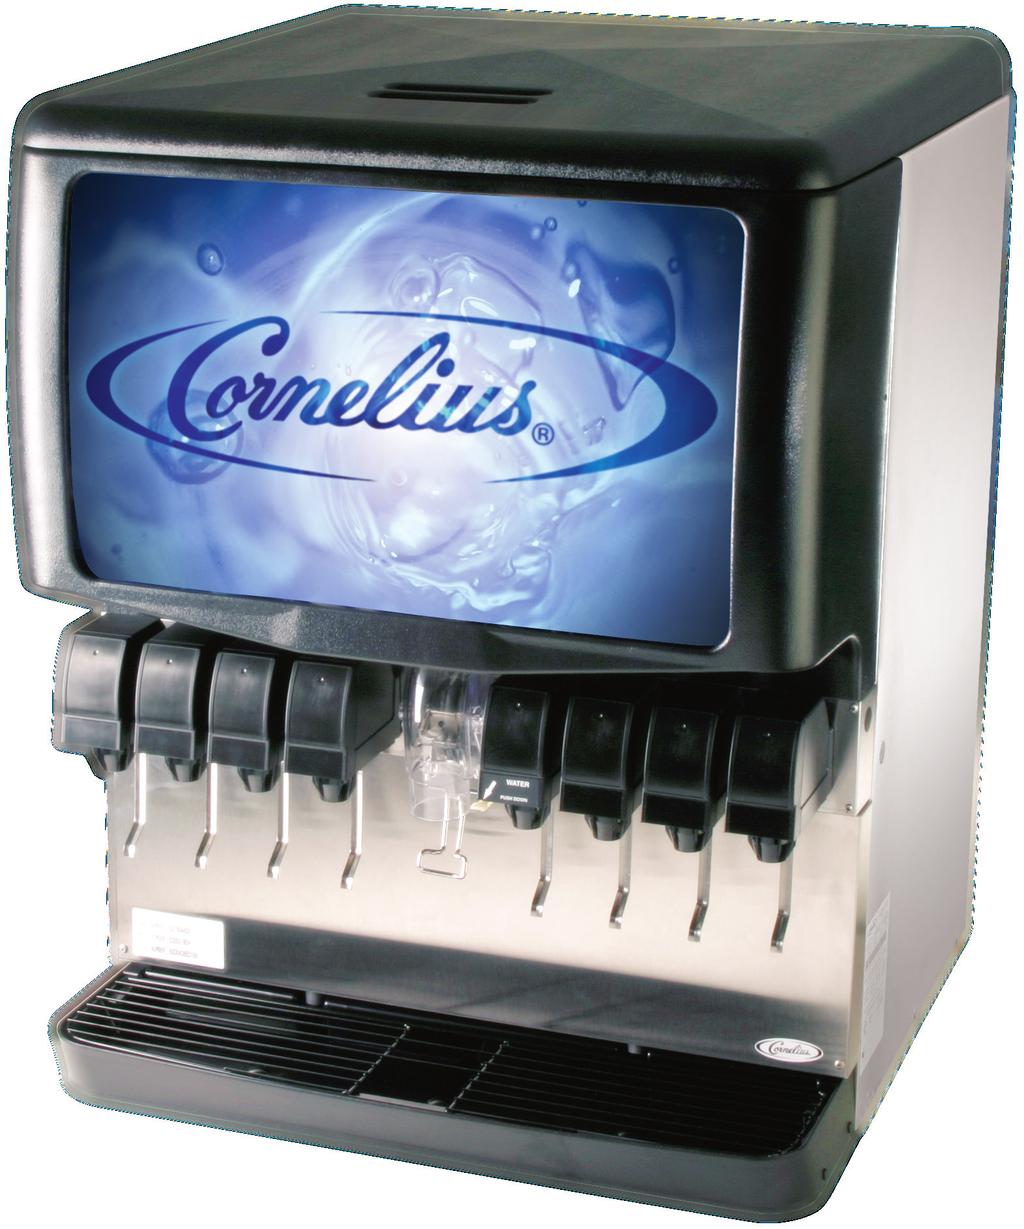 ENDURO 250 POST-MIX ICE DRINK DISPENSER FEATURES Large ice capactiy- 250 lb.